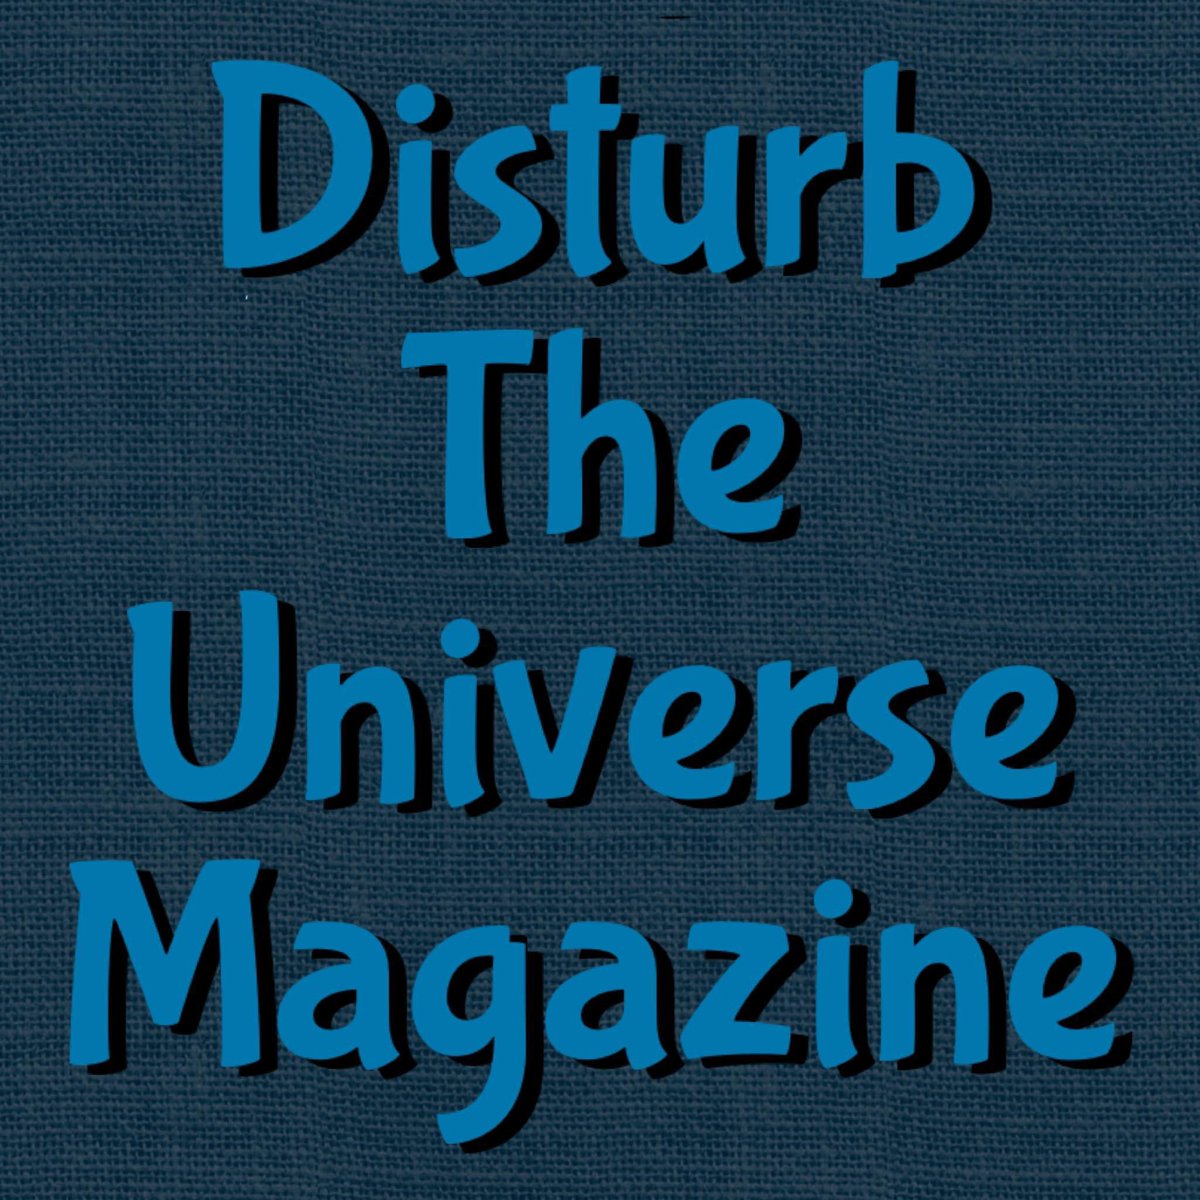 Up today at Disturb The Universe Magazine 

Carcasses of Spiders by Ace Boggess

disturbtheuniversemagazine.com/2024/05/carcas…

#publishedwriting #disturbtheuniversemagazine #published #writingcommunity #poetry #writing #publishedpoetry #poetrylovers #poetrytwitter #poetrycommunity